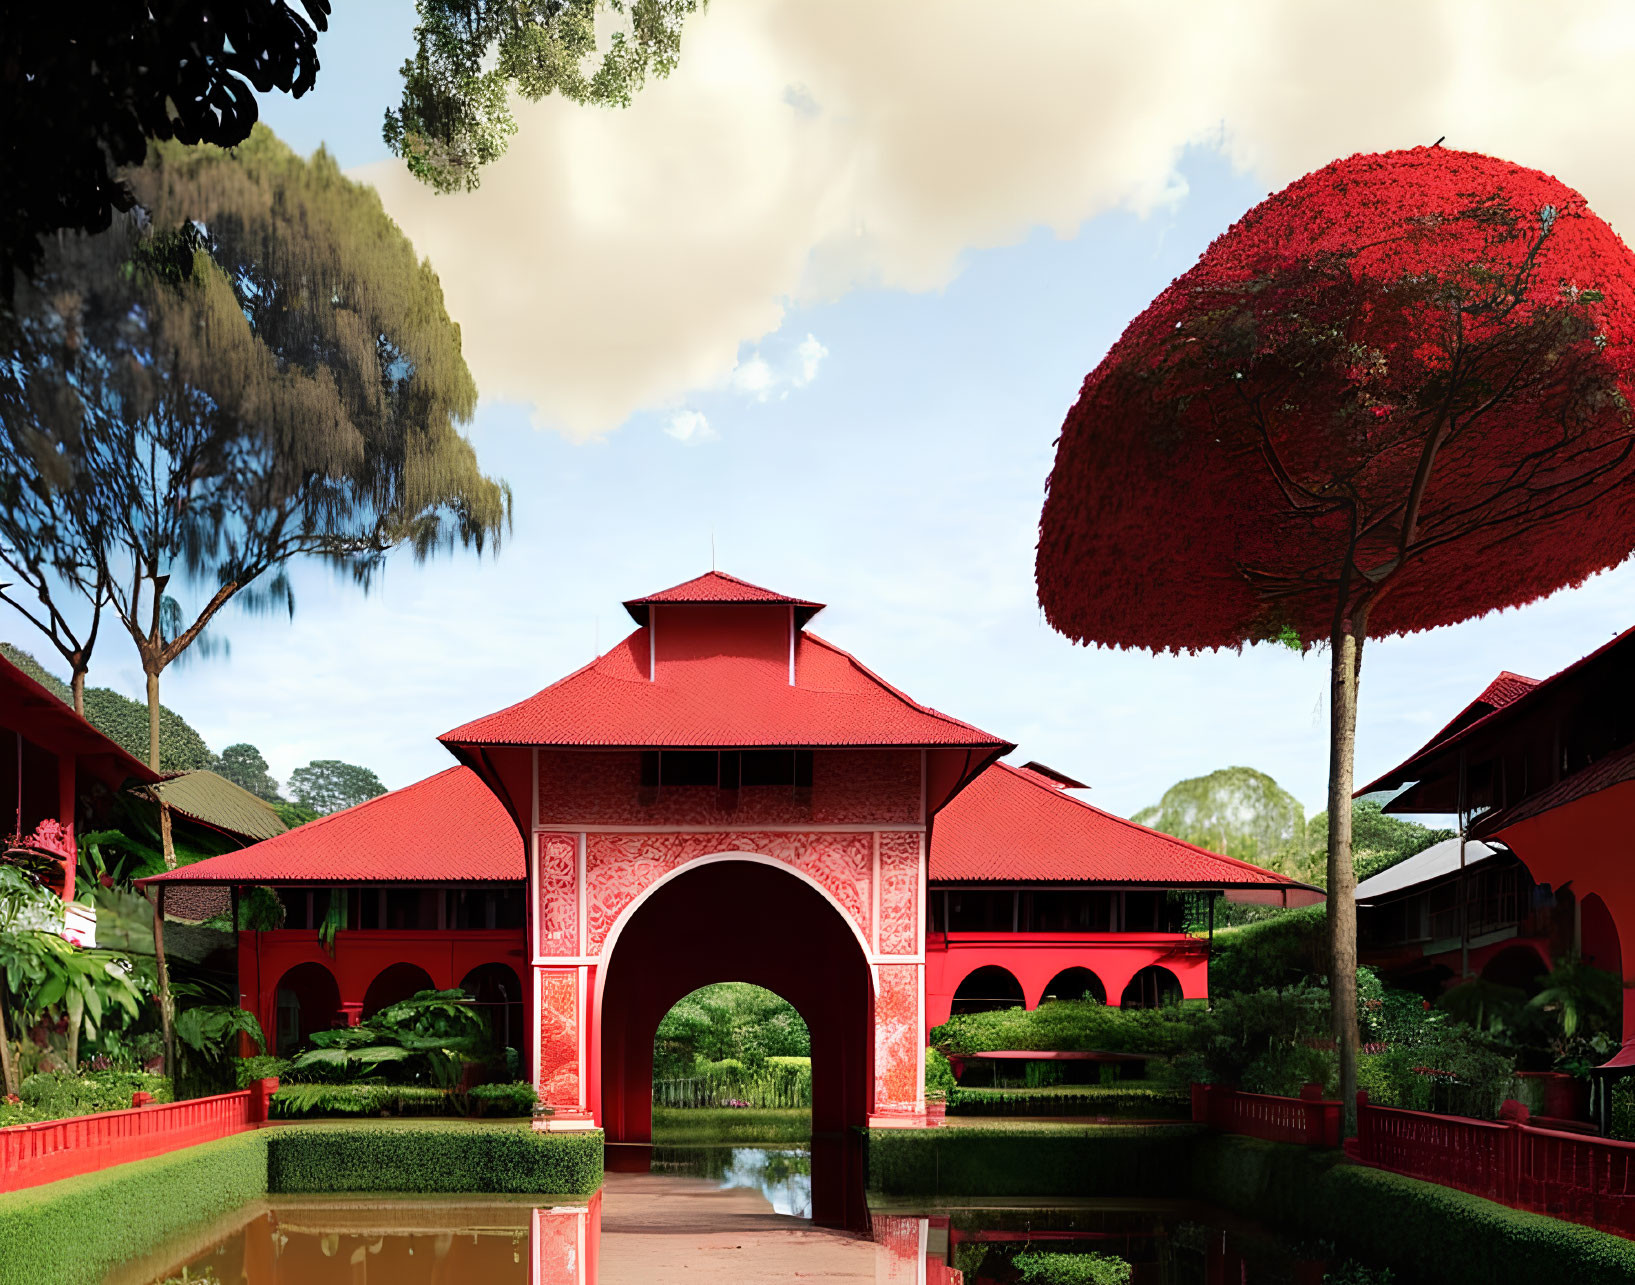 Traditional red pavilion reflected in water amidst lush greenery and vibrant red tree